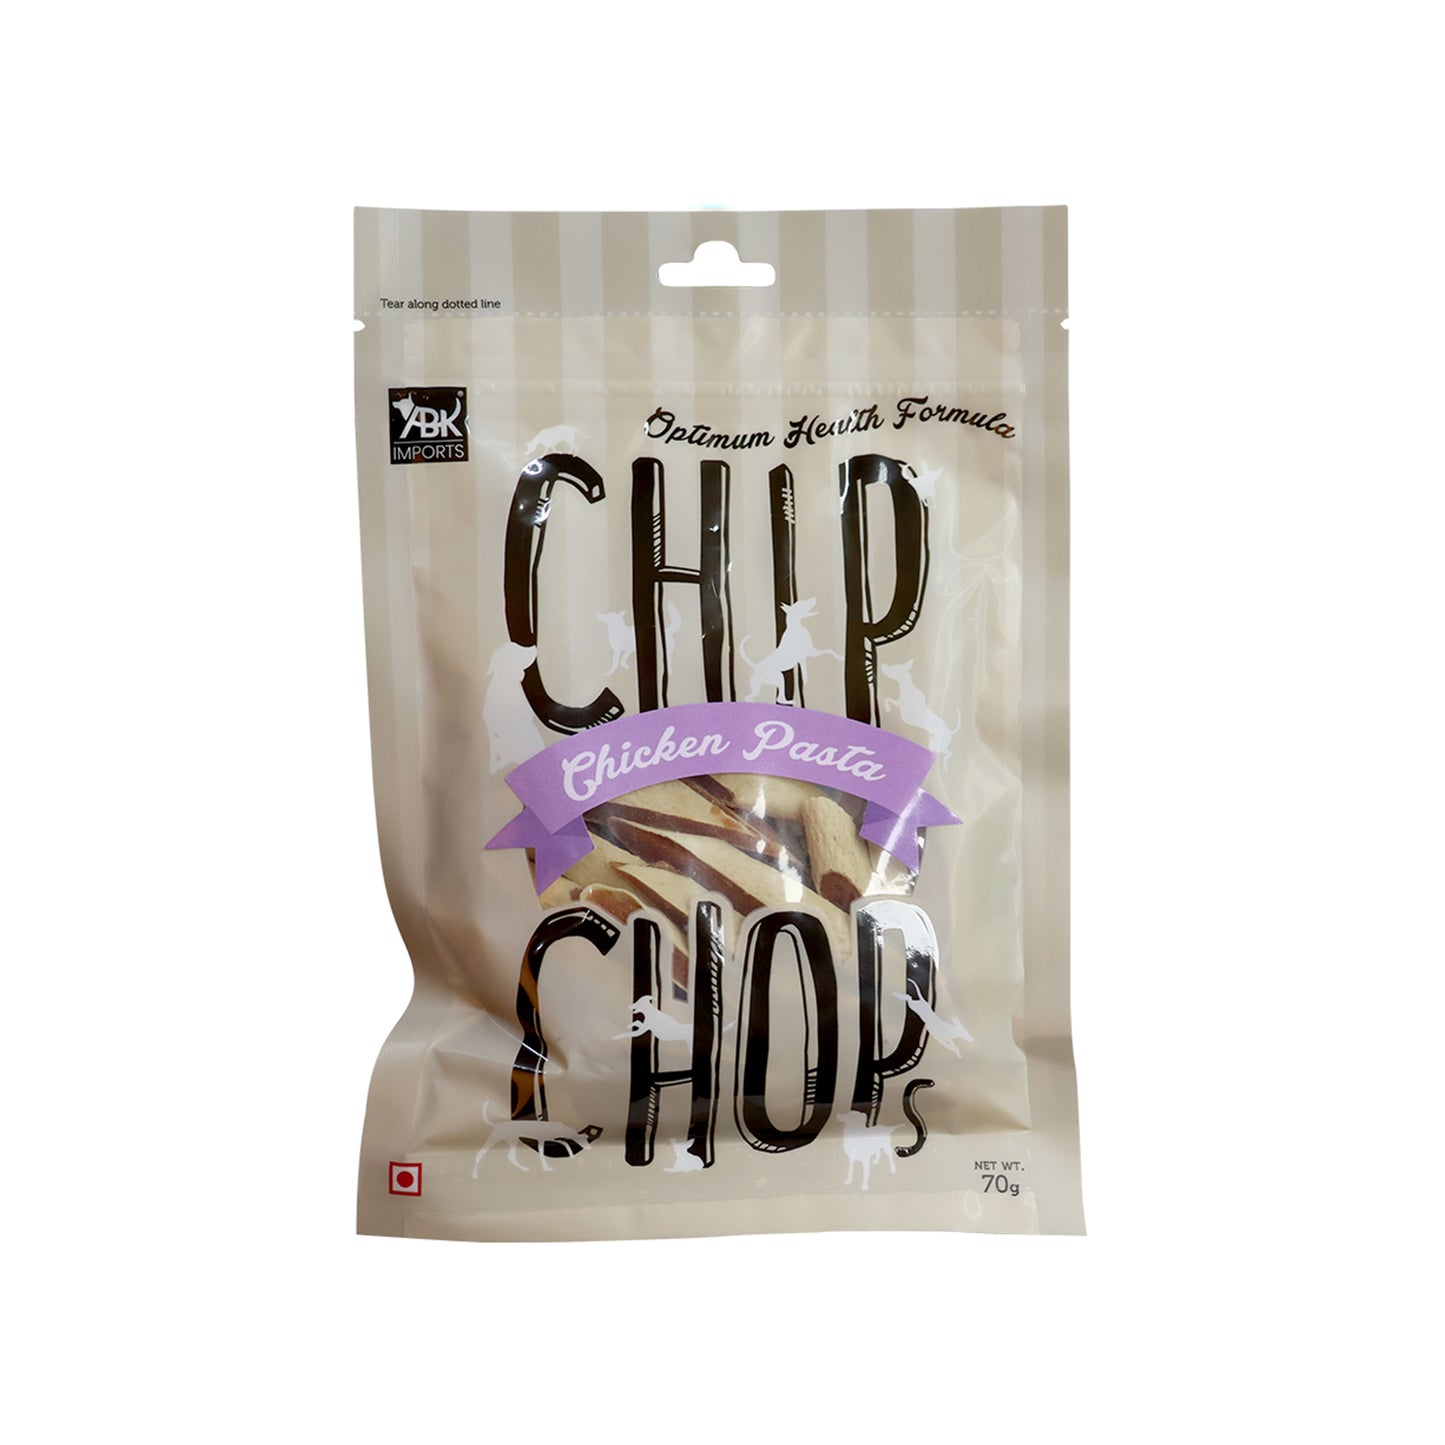 Chip Chops - Chicken Pasta For Dogs